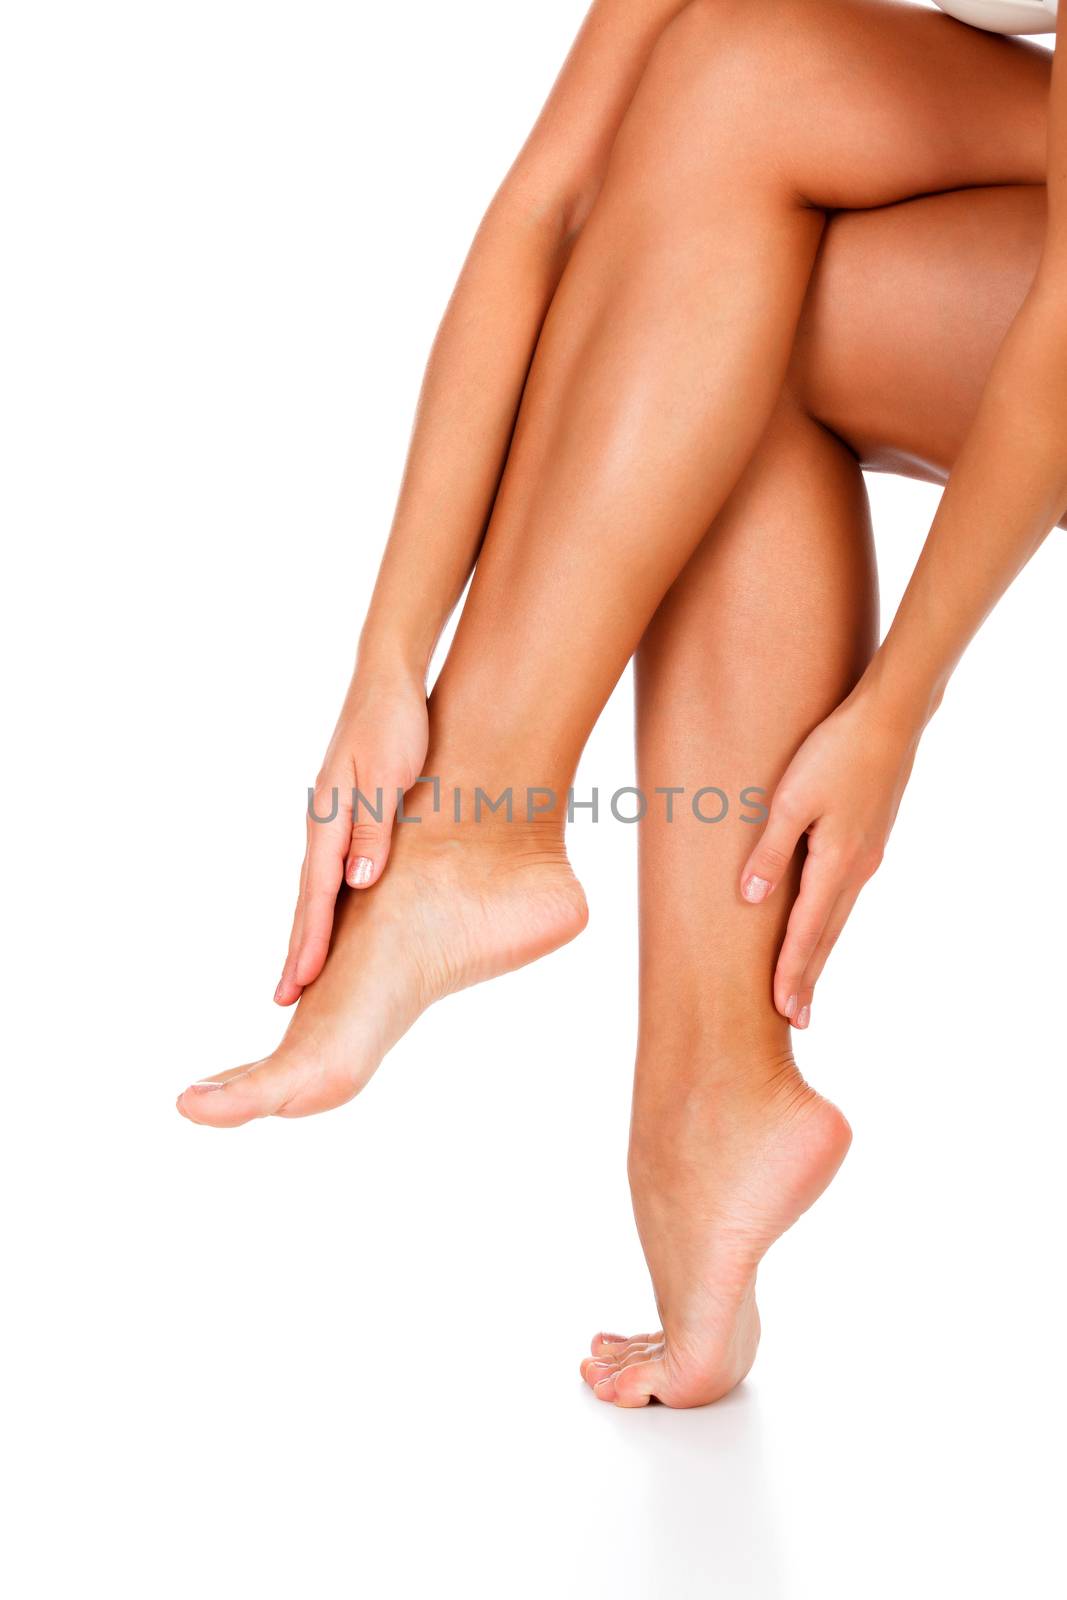 Woman's legs with clean and smooth skin on white background, iso by Nobilior